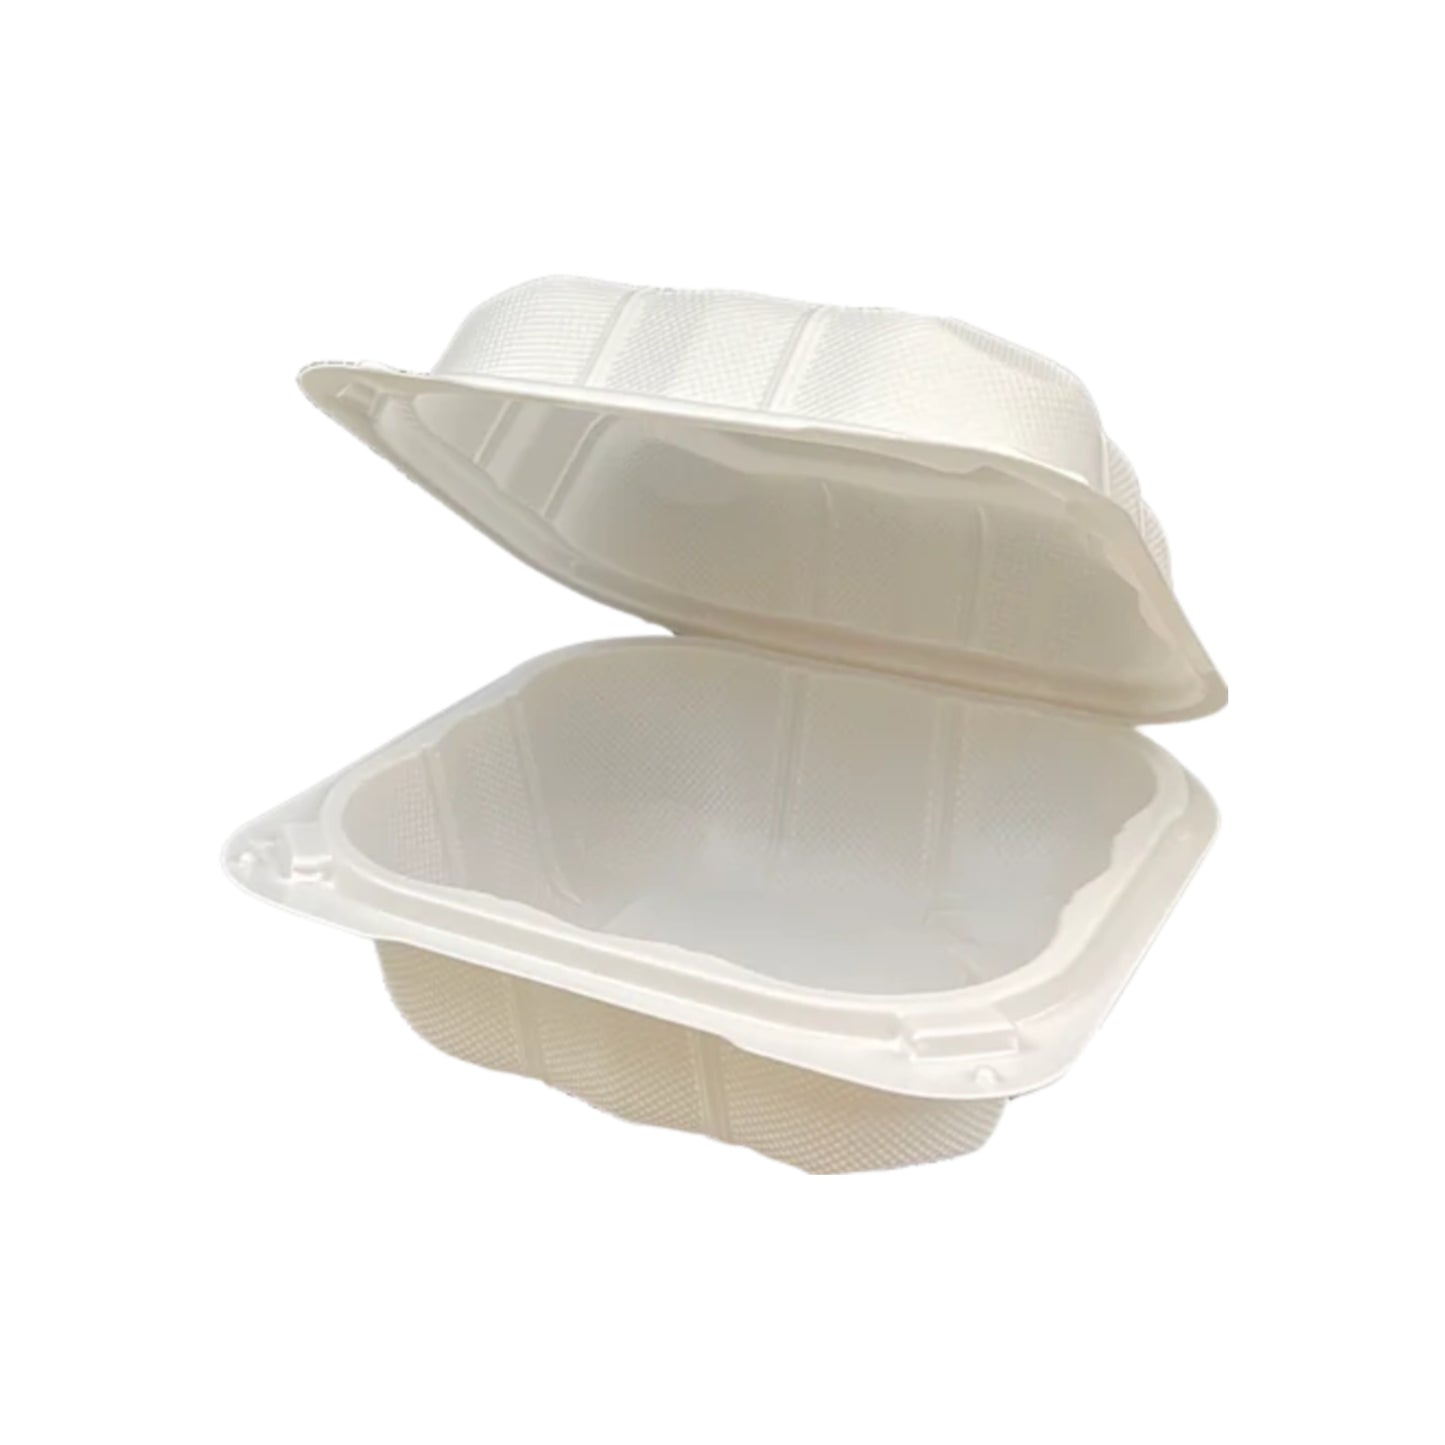 KIS-PP224G | 5x5x2.88 inches, 1-Compartment, PP Clamshell Food Container; $0.141/pc